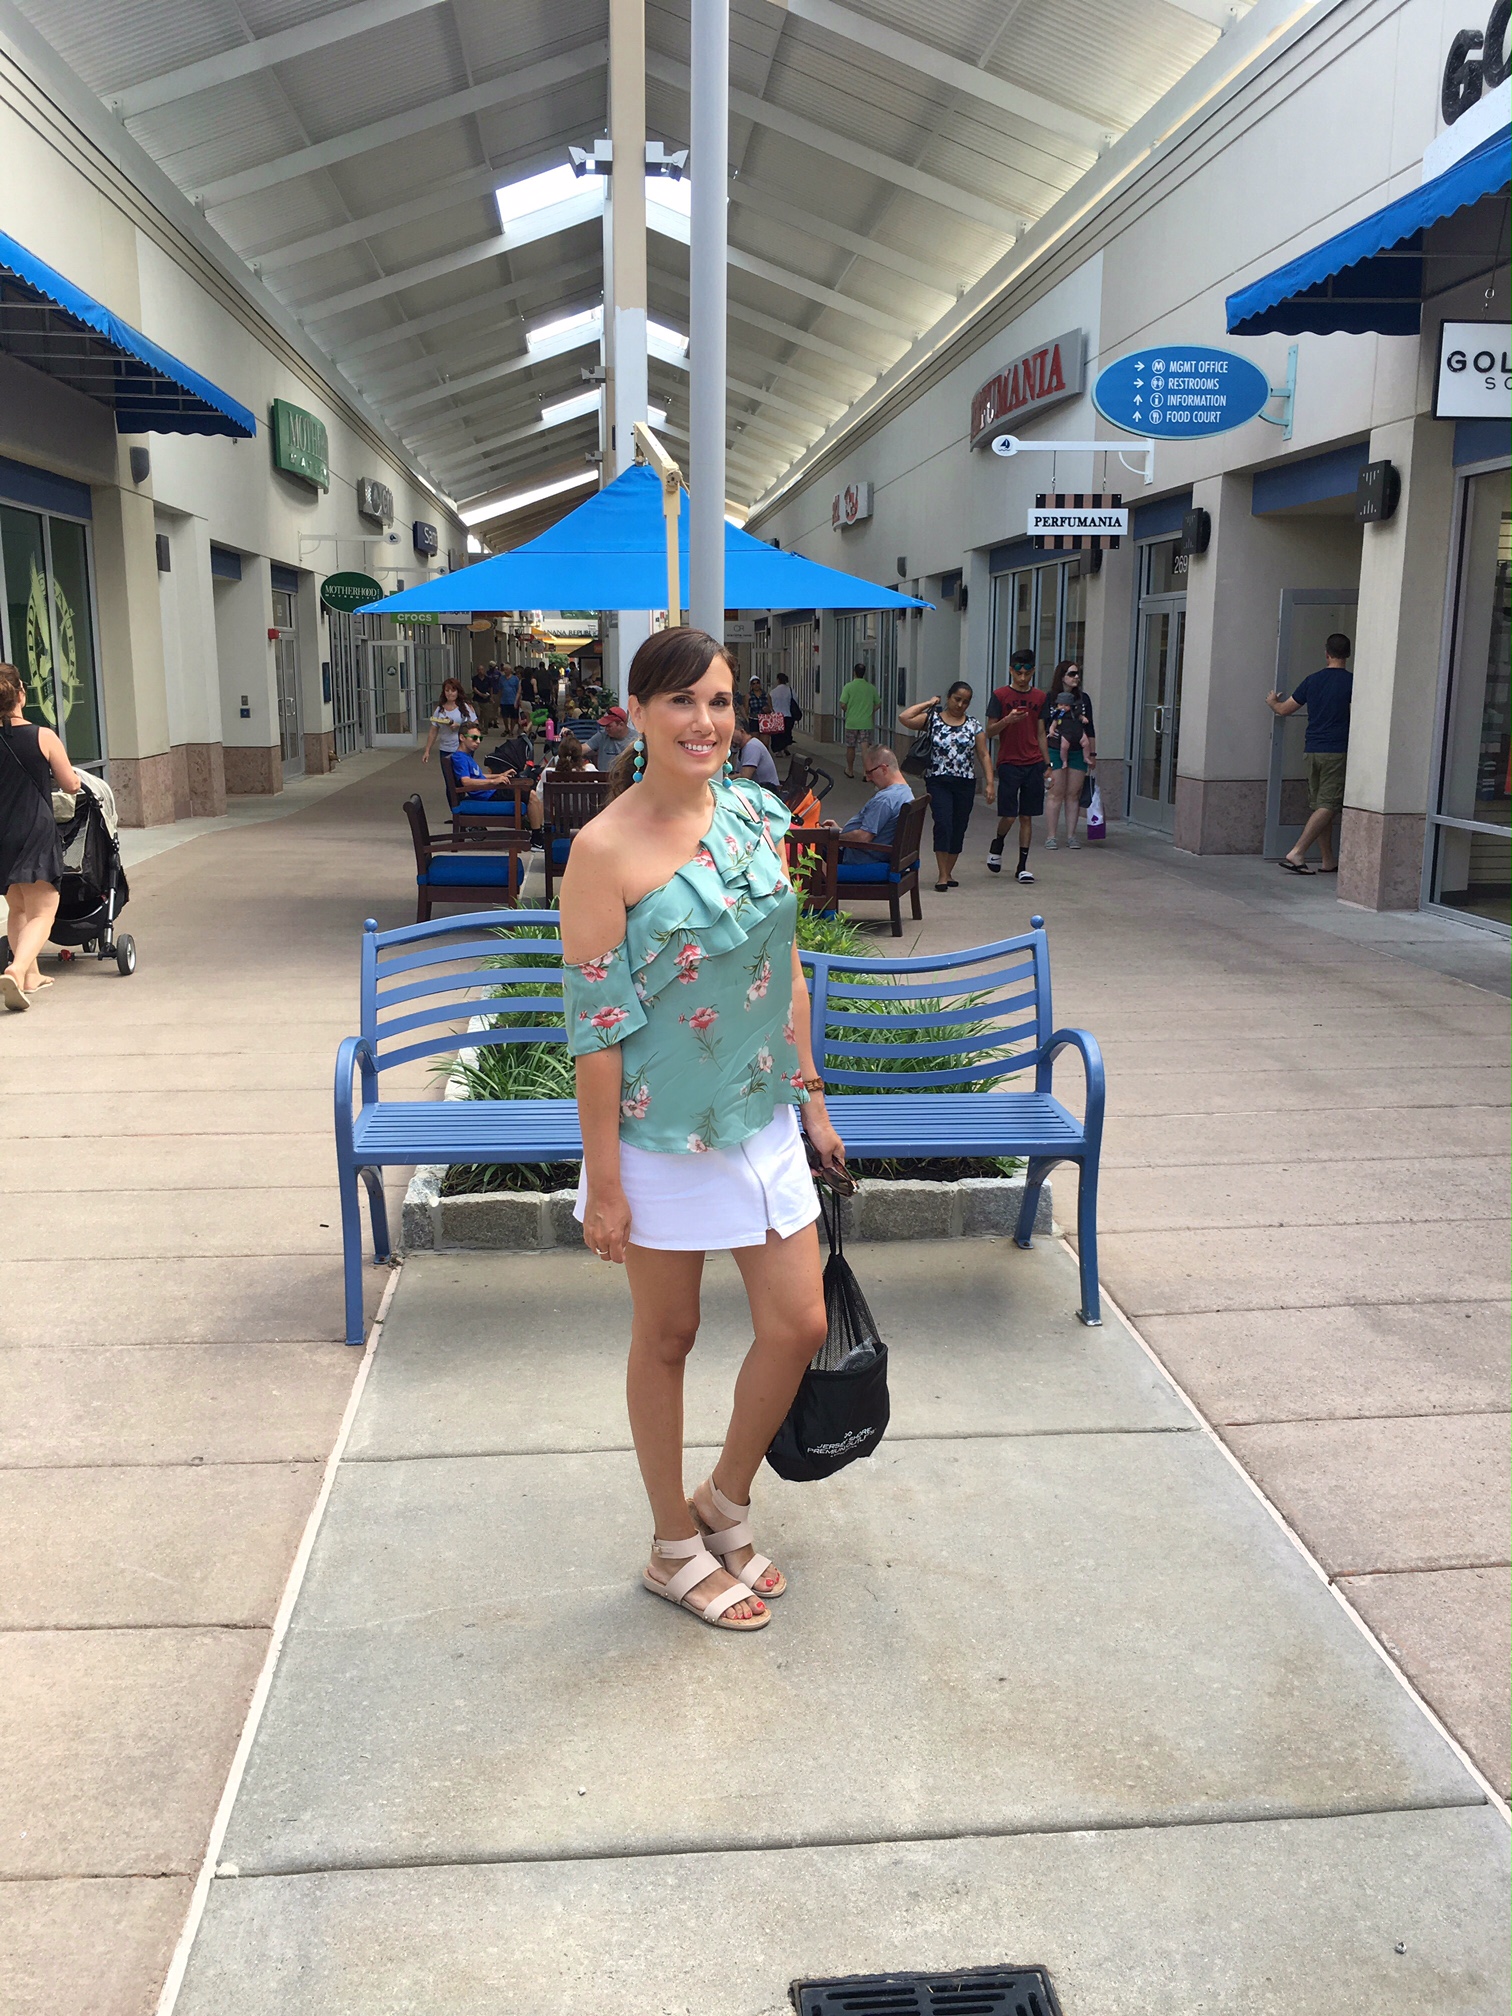 kate spade jersey shore outlets